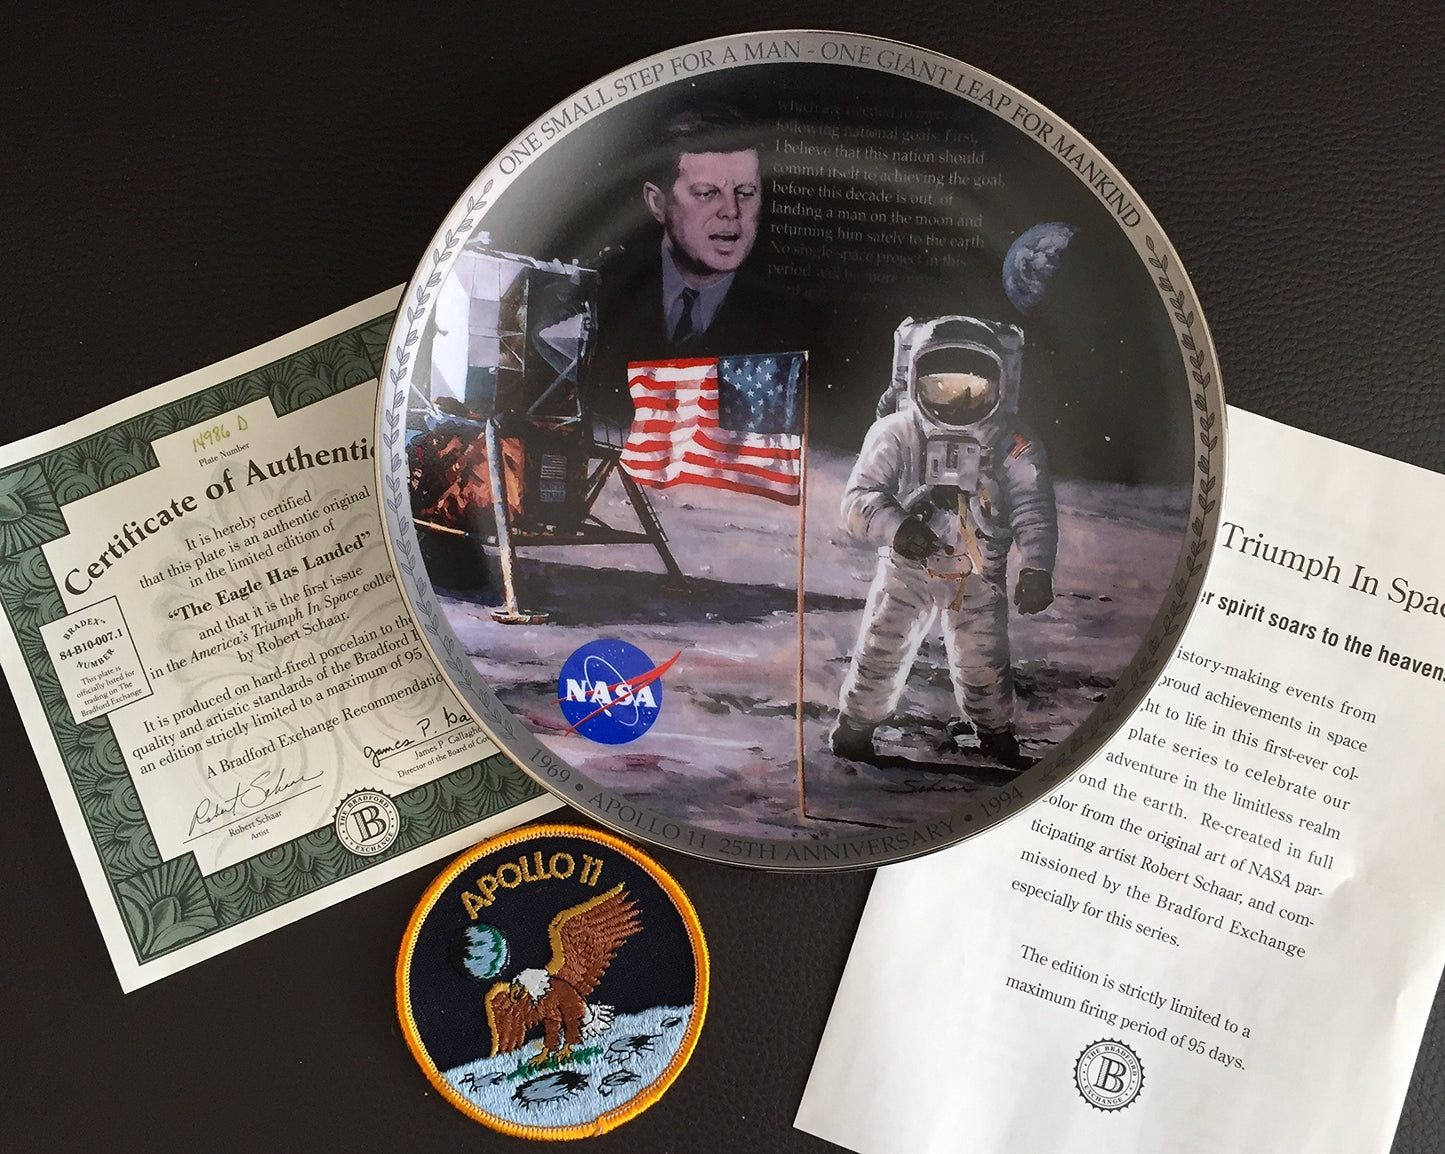 Apollo 11 25th Anniversary Limited Edition "The Eagle Has Landed" By Robert Schaar Collector Plate - Brand New Shop Stock Room Find